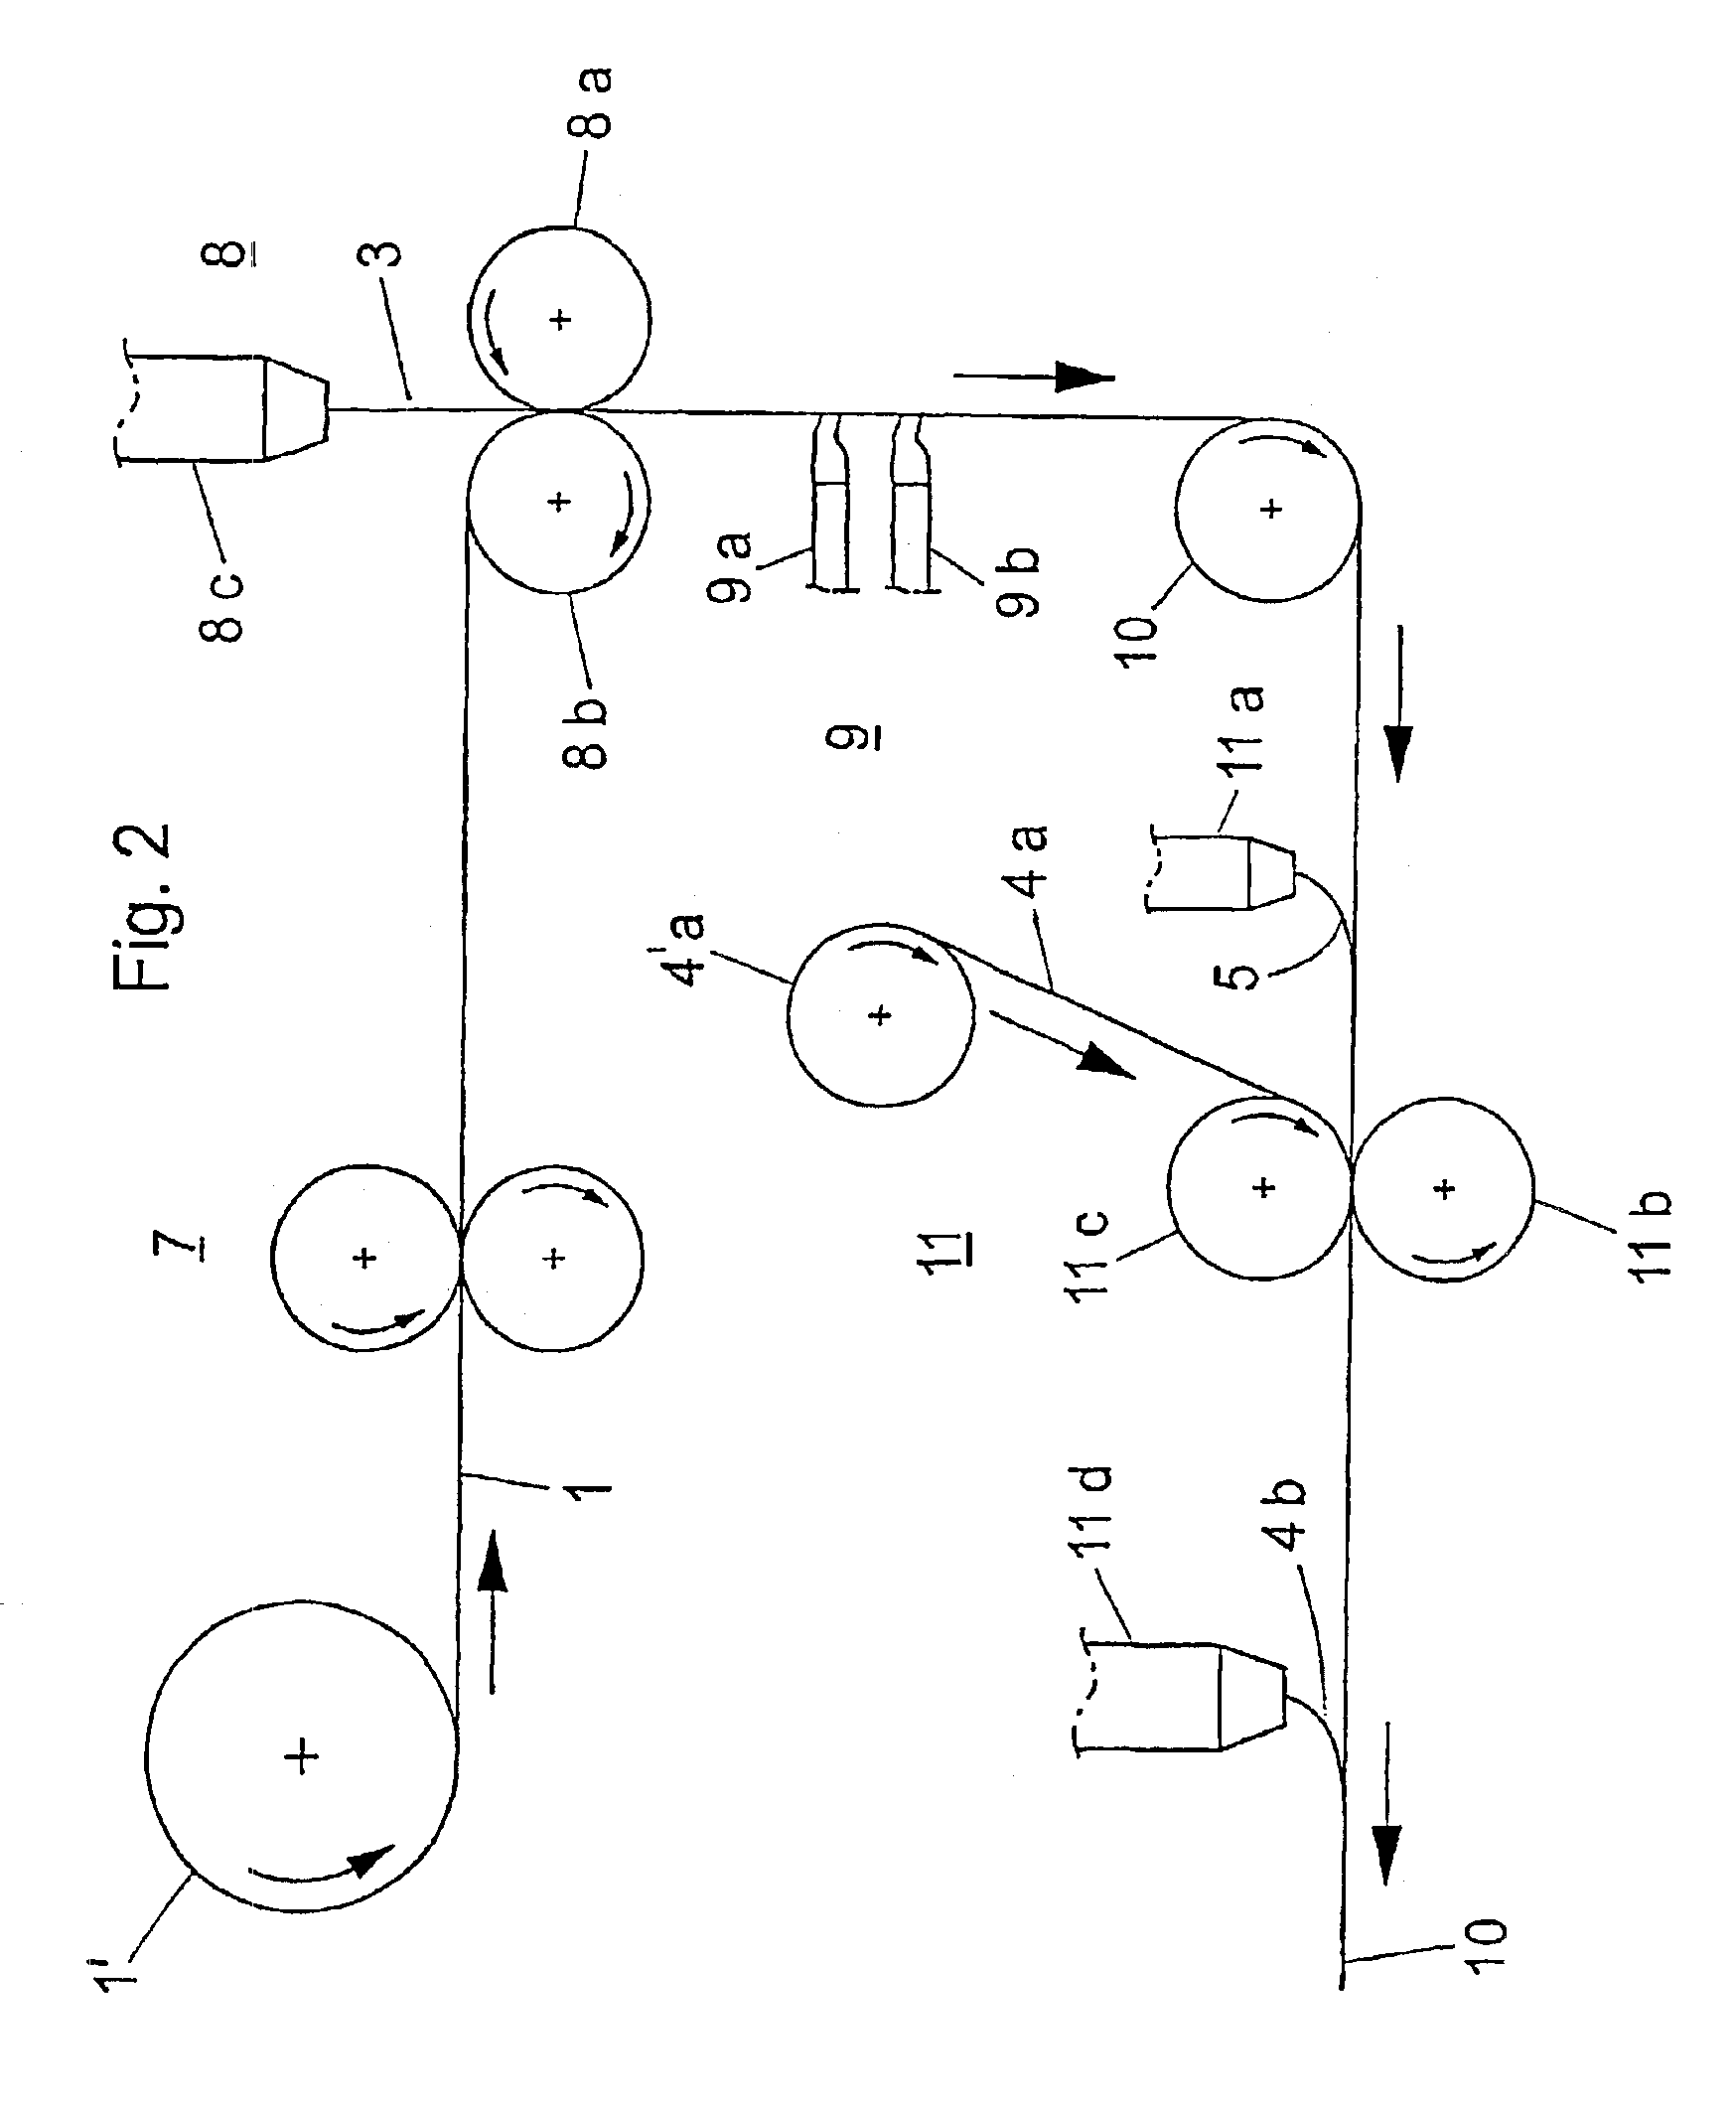 Method of producing a packaging material